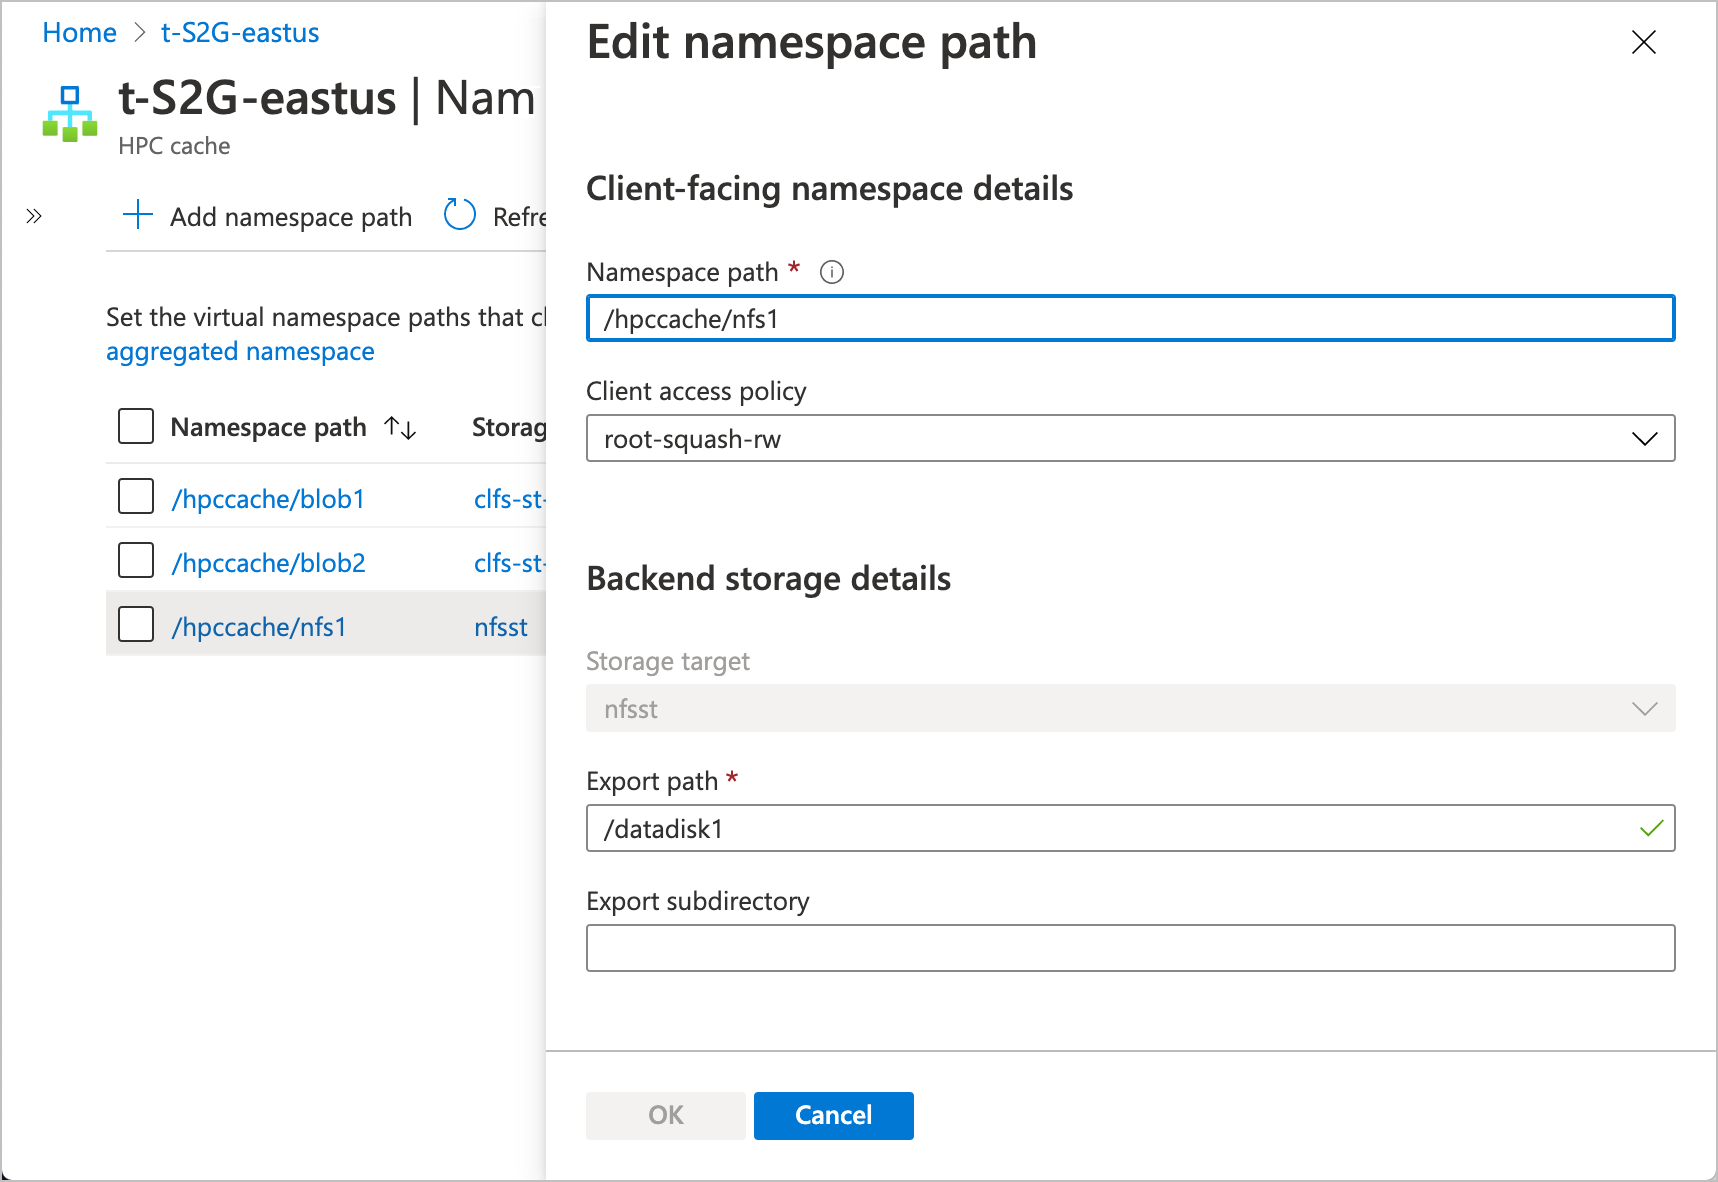 Screenshot of the portal namespace page with the edit page open at the right. The edit form shows settings for an N F S storage target namespace path.